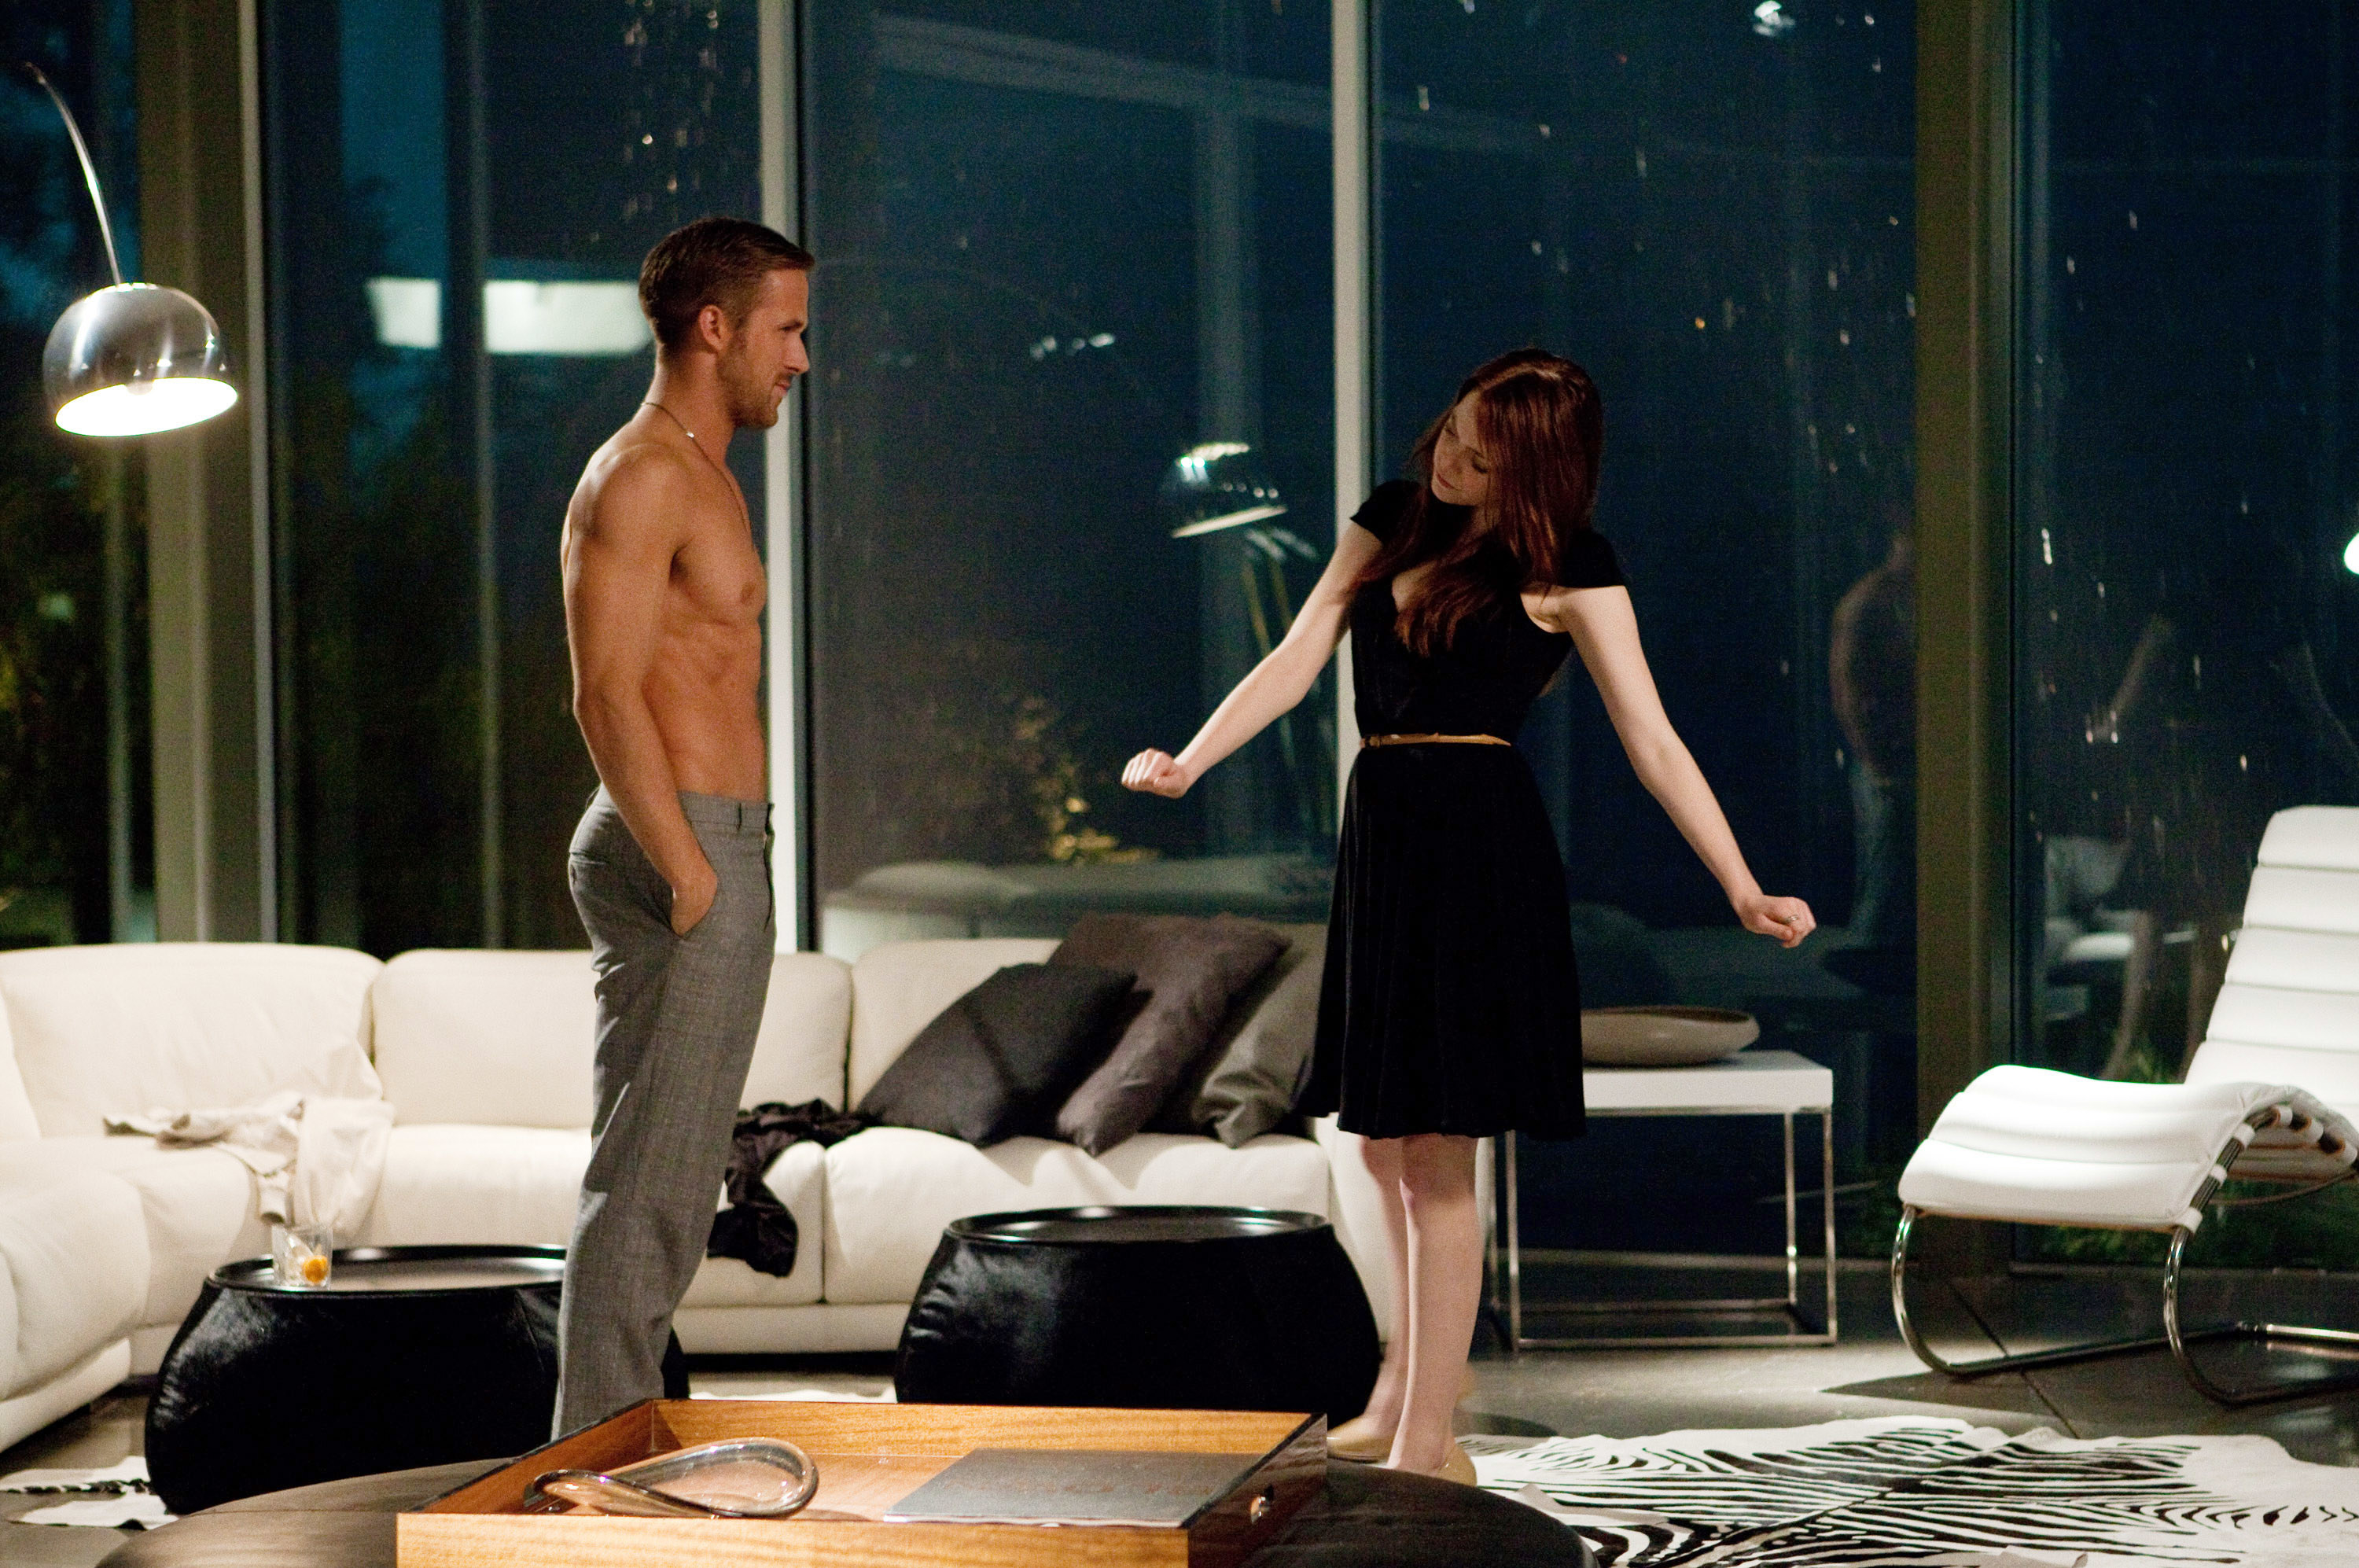 Ryan Gosling and Emma Stone facing each other in a lavish living room